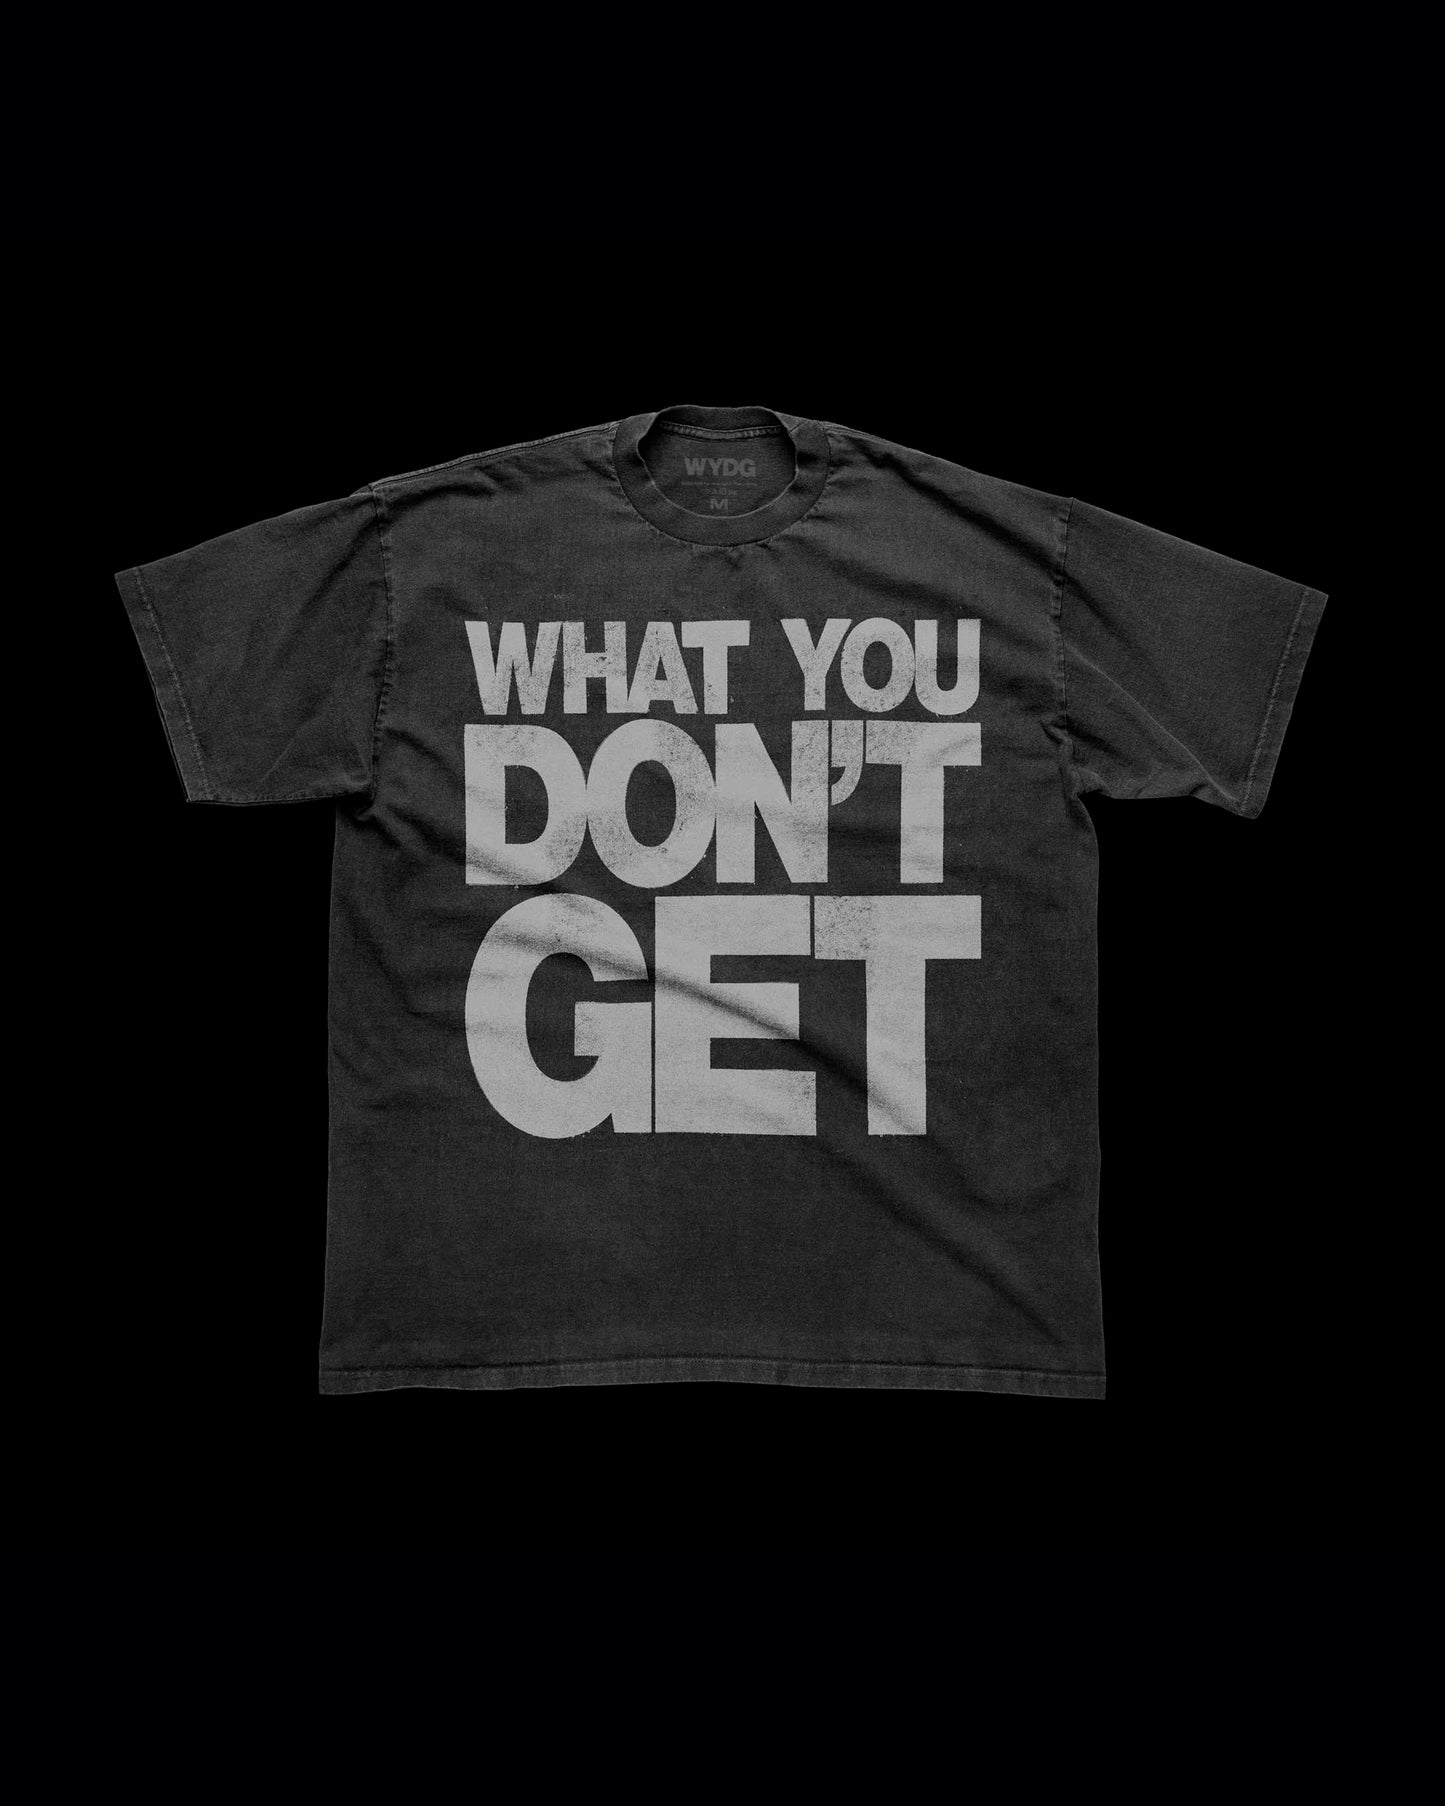 What You Don't Get (Black Shirt)